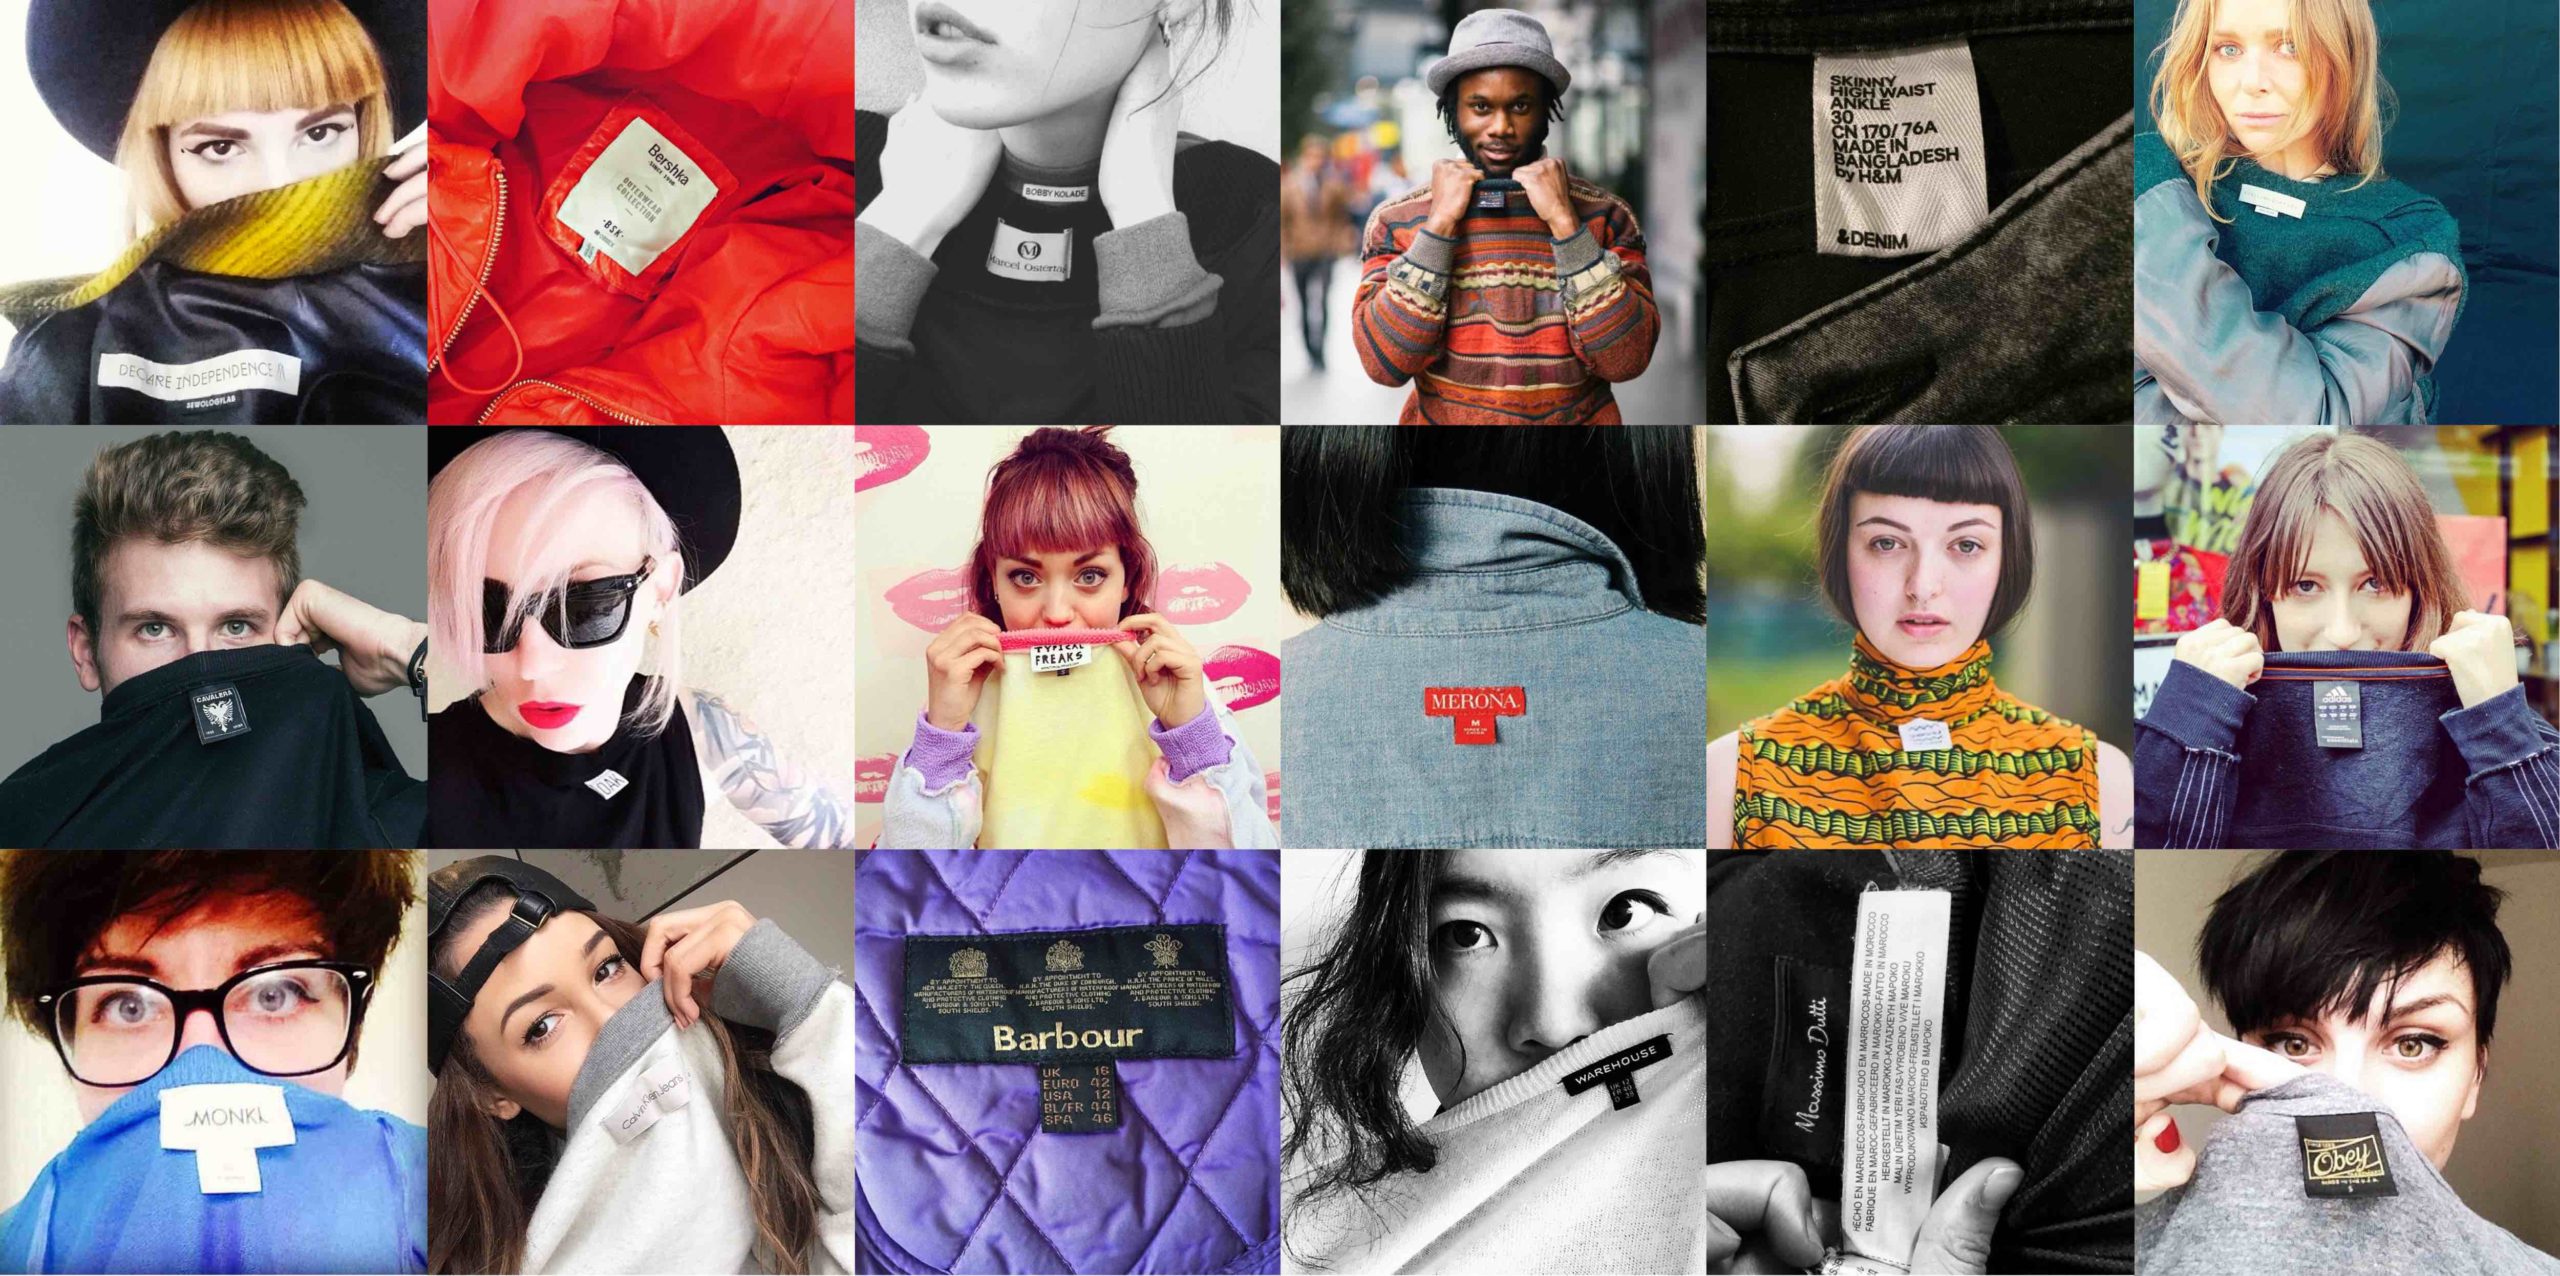 How to become a fashion activist in one easy step? Fashion Revolution #WhoMadeMyClothes